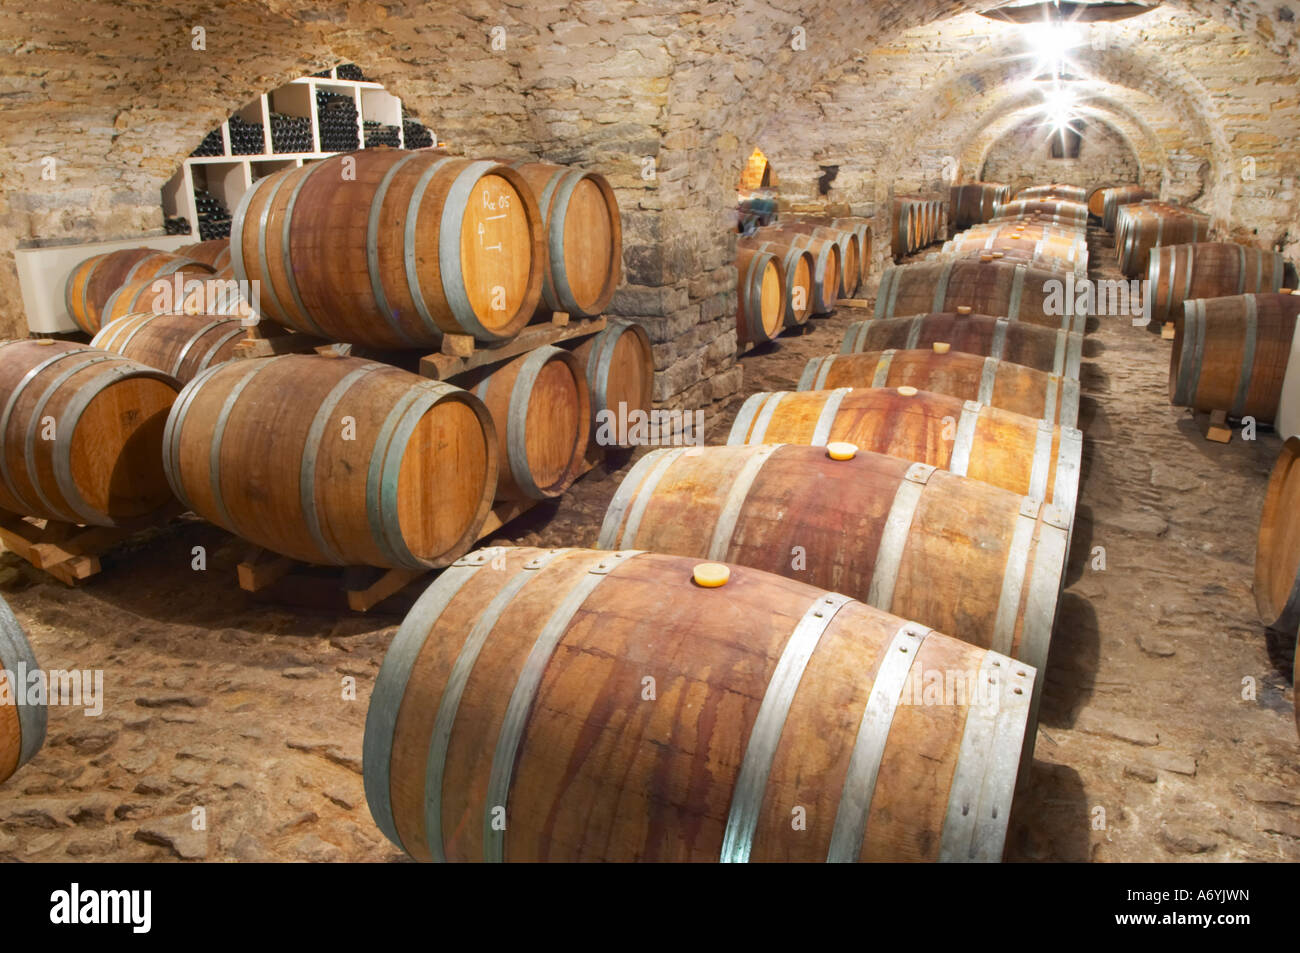 Domaine Cazeneuve in Lauret. Pic St Loup. Languedoc. Barrel cellar. France. Europe. Old vaulted stone cellar. Stock Photo